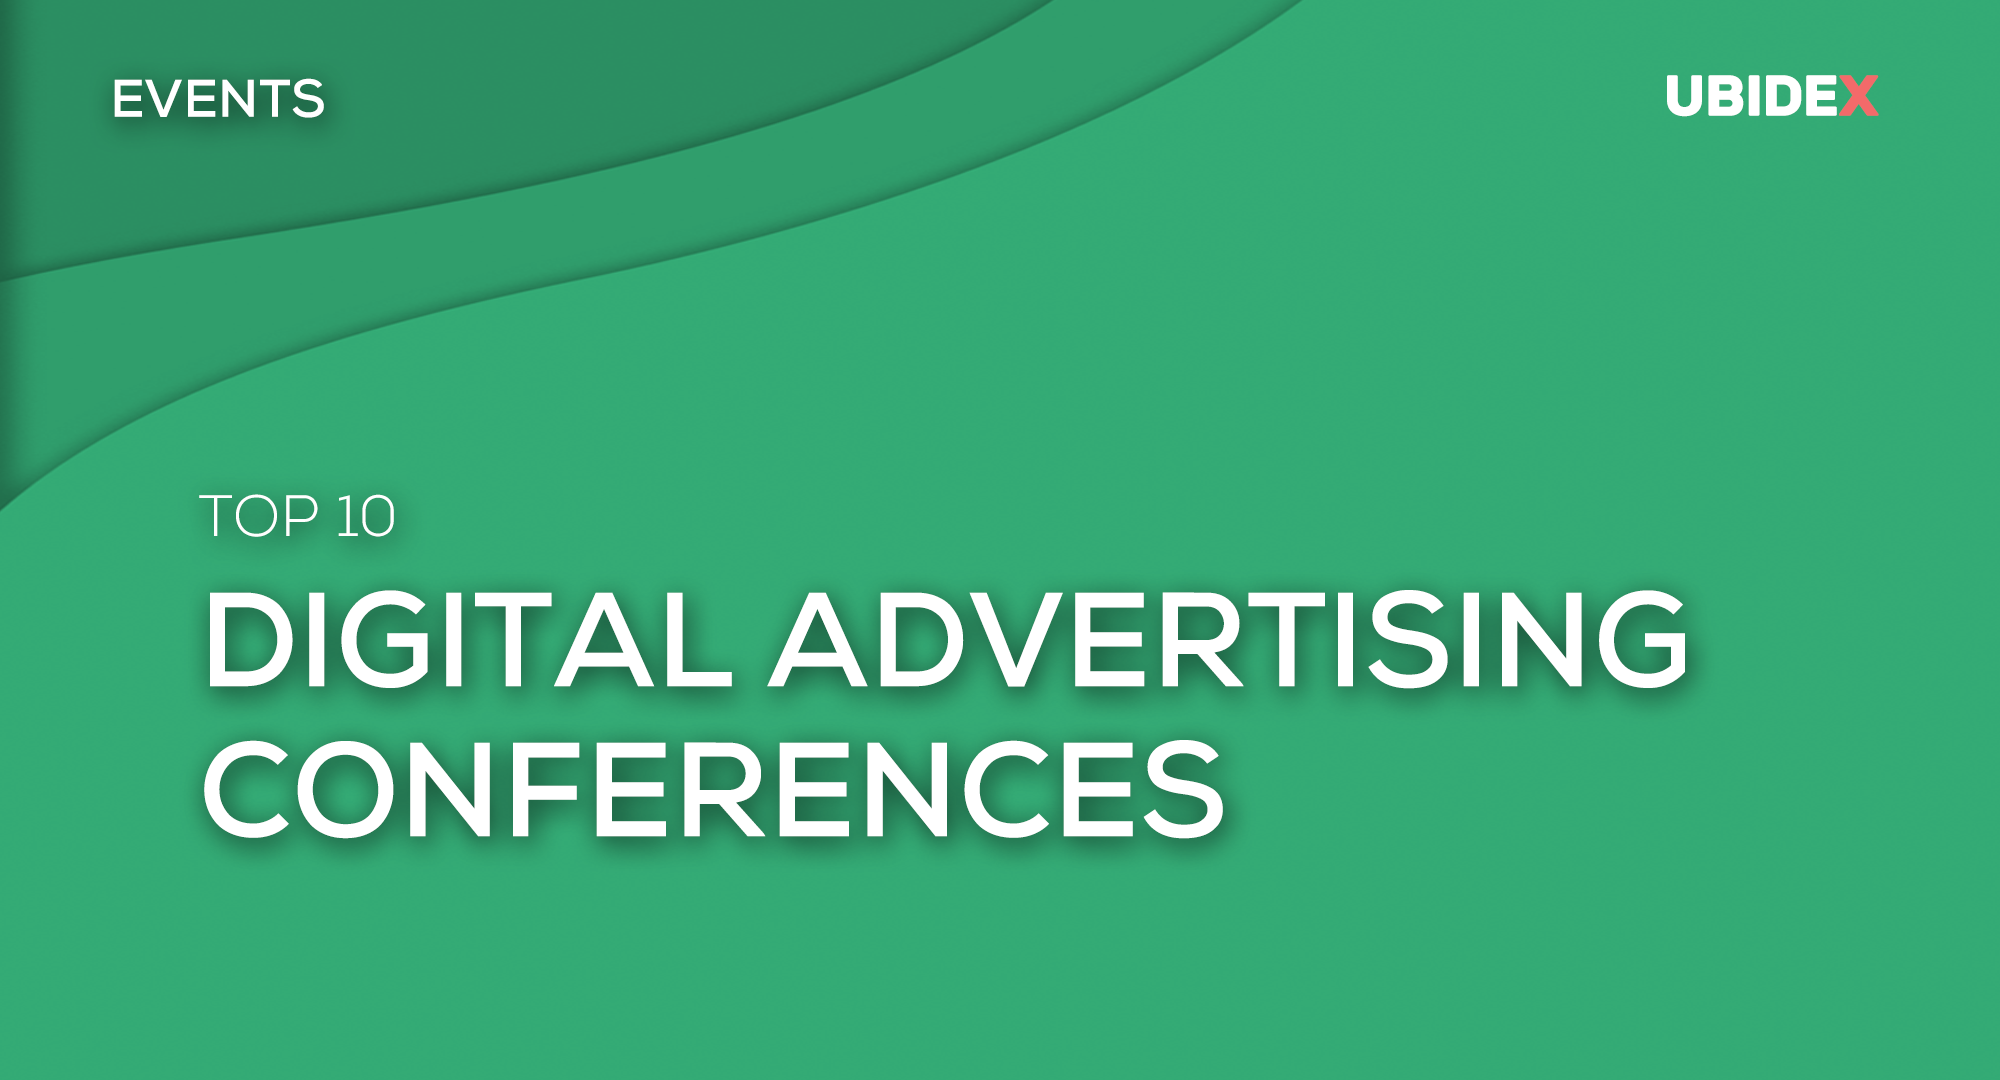 TOP 10 Digital Advertising Conferences to attend in 2022